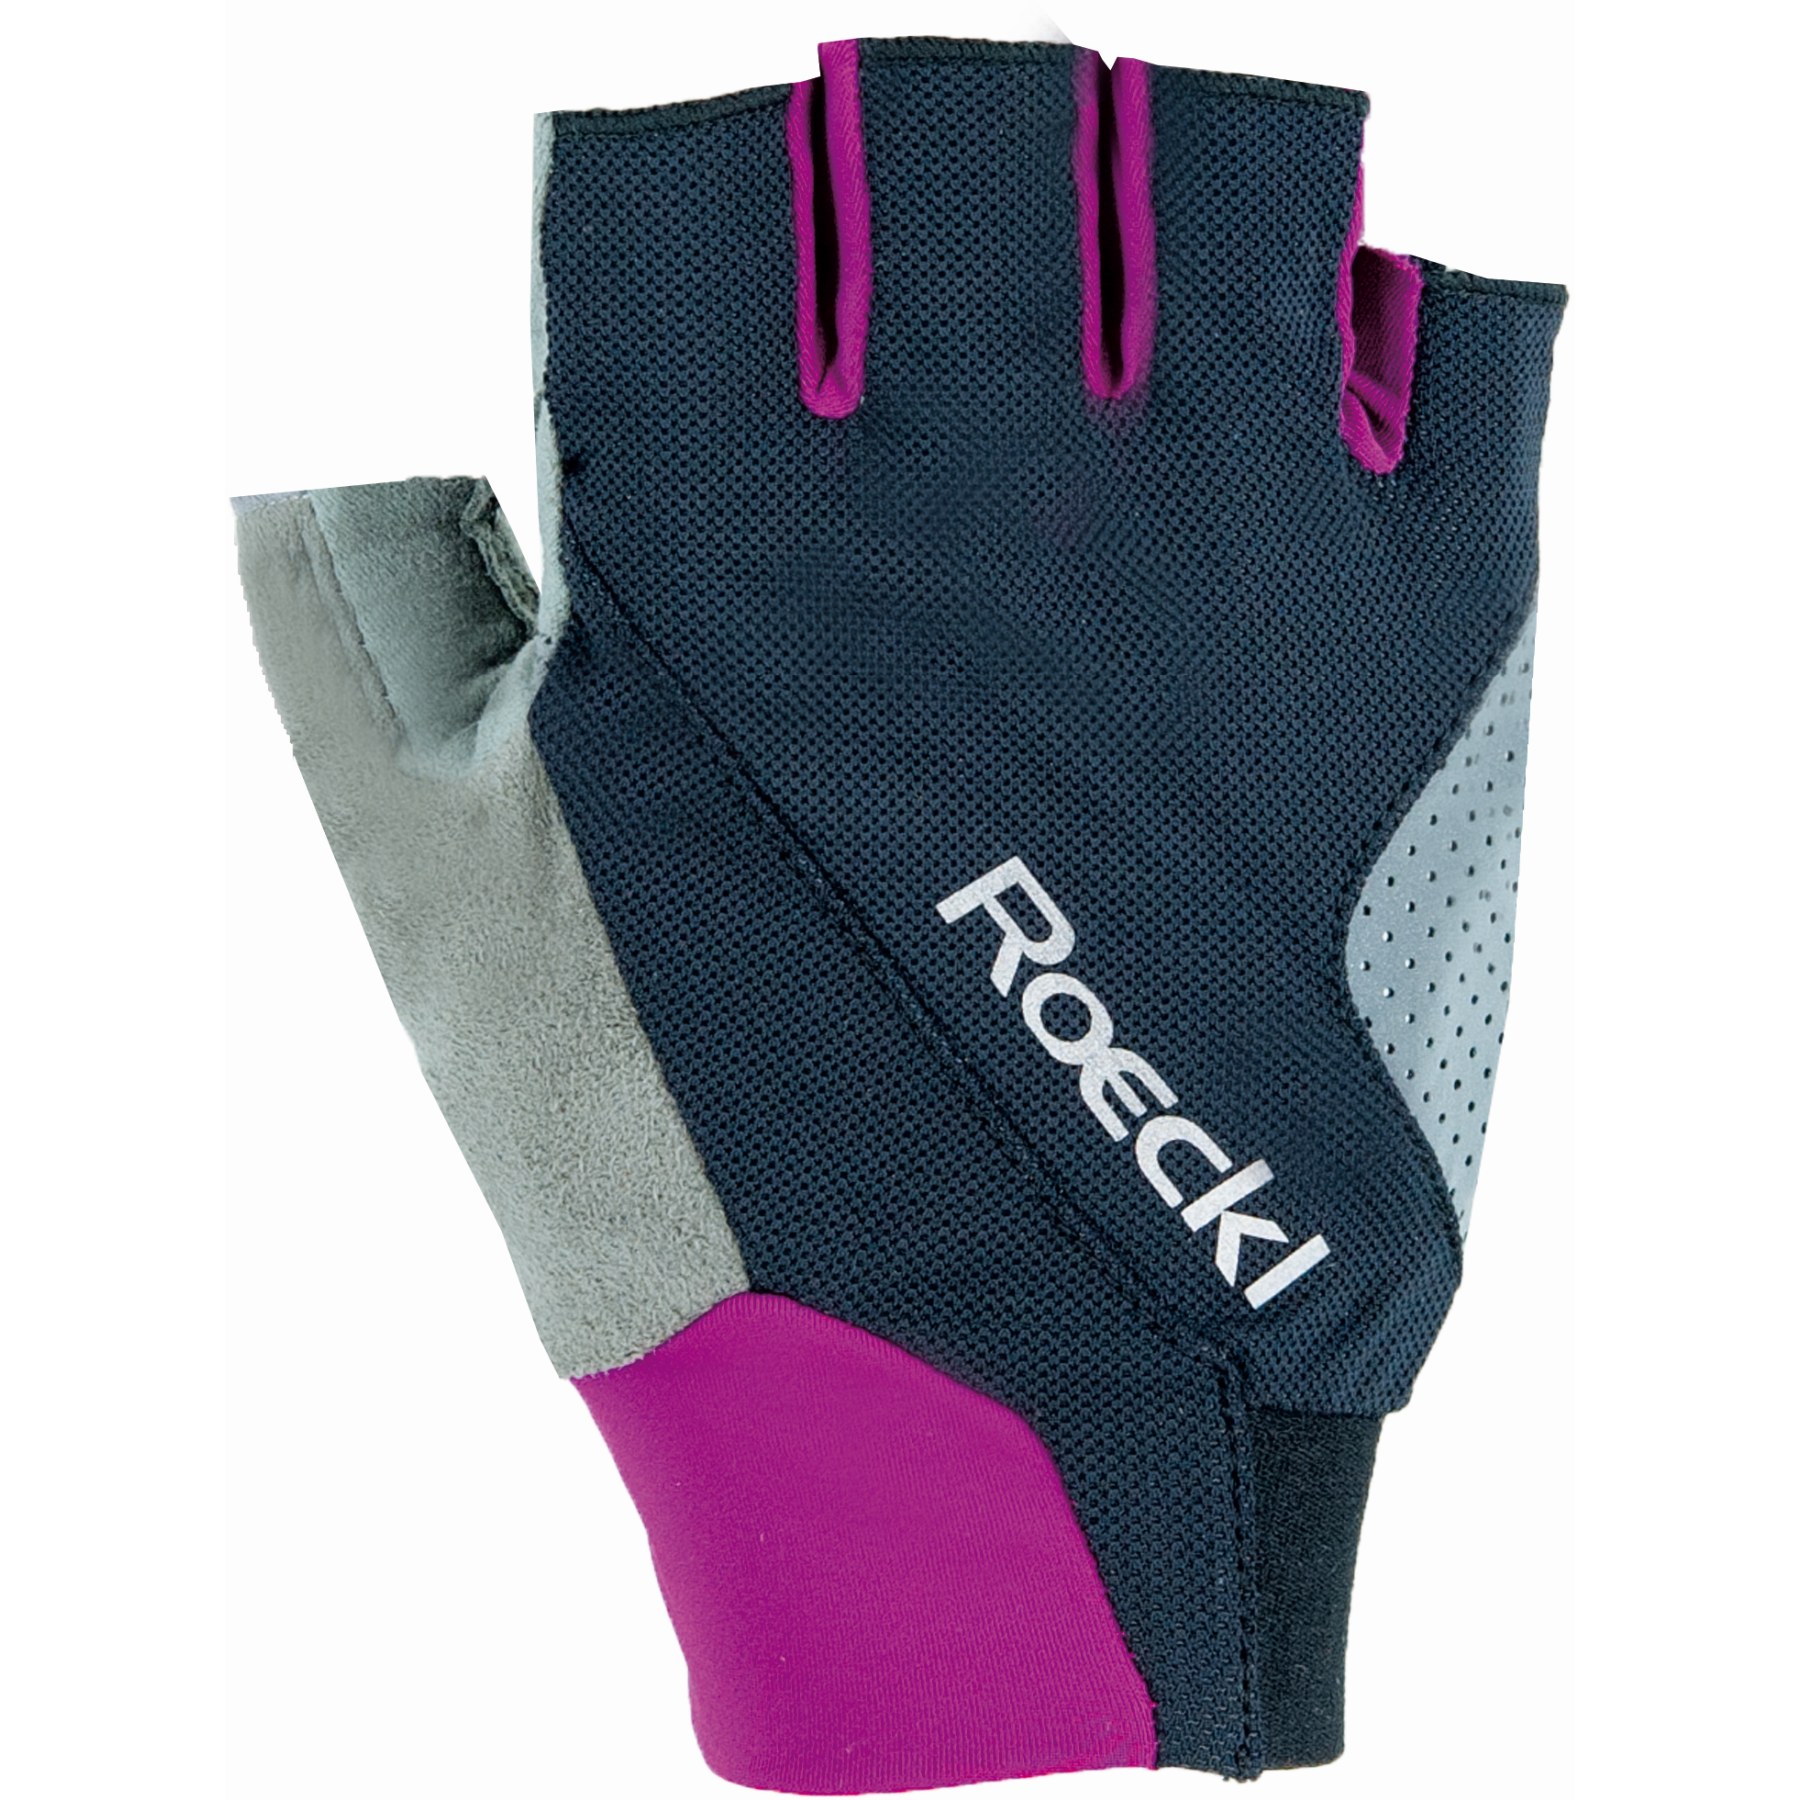 Image of Roeckl Sports Ivory Cycling Gloves - black/berry 064